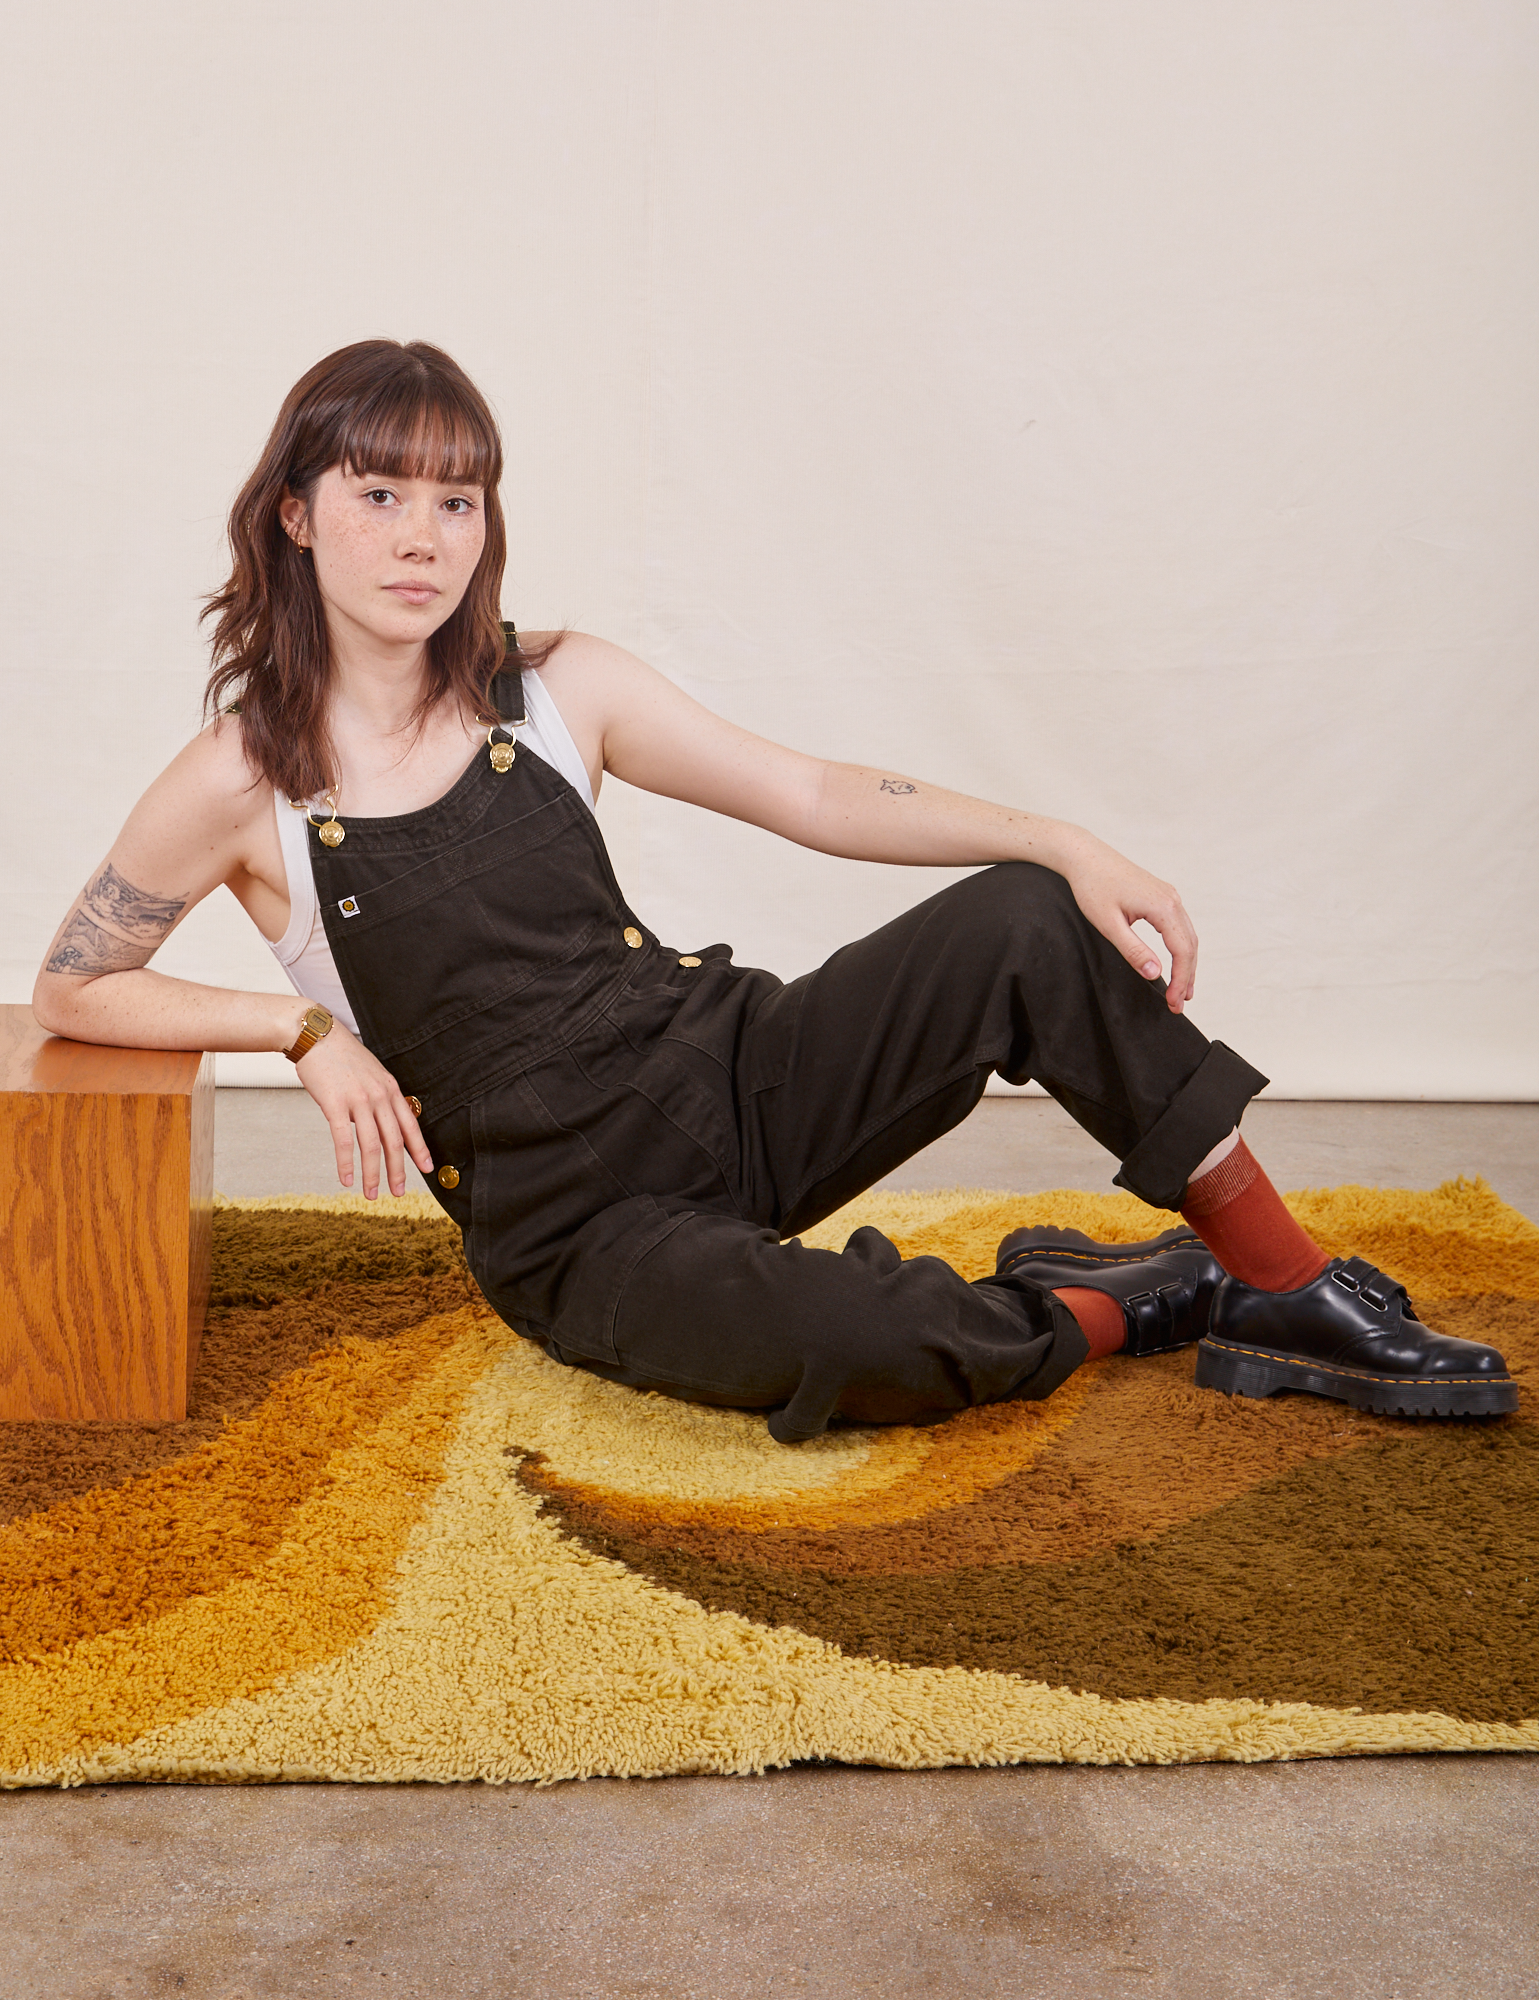 Hana is wearing Original Overalls in Mono Espresso with a Cropped Tank Top in vintage tee off-white underneath.